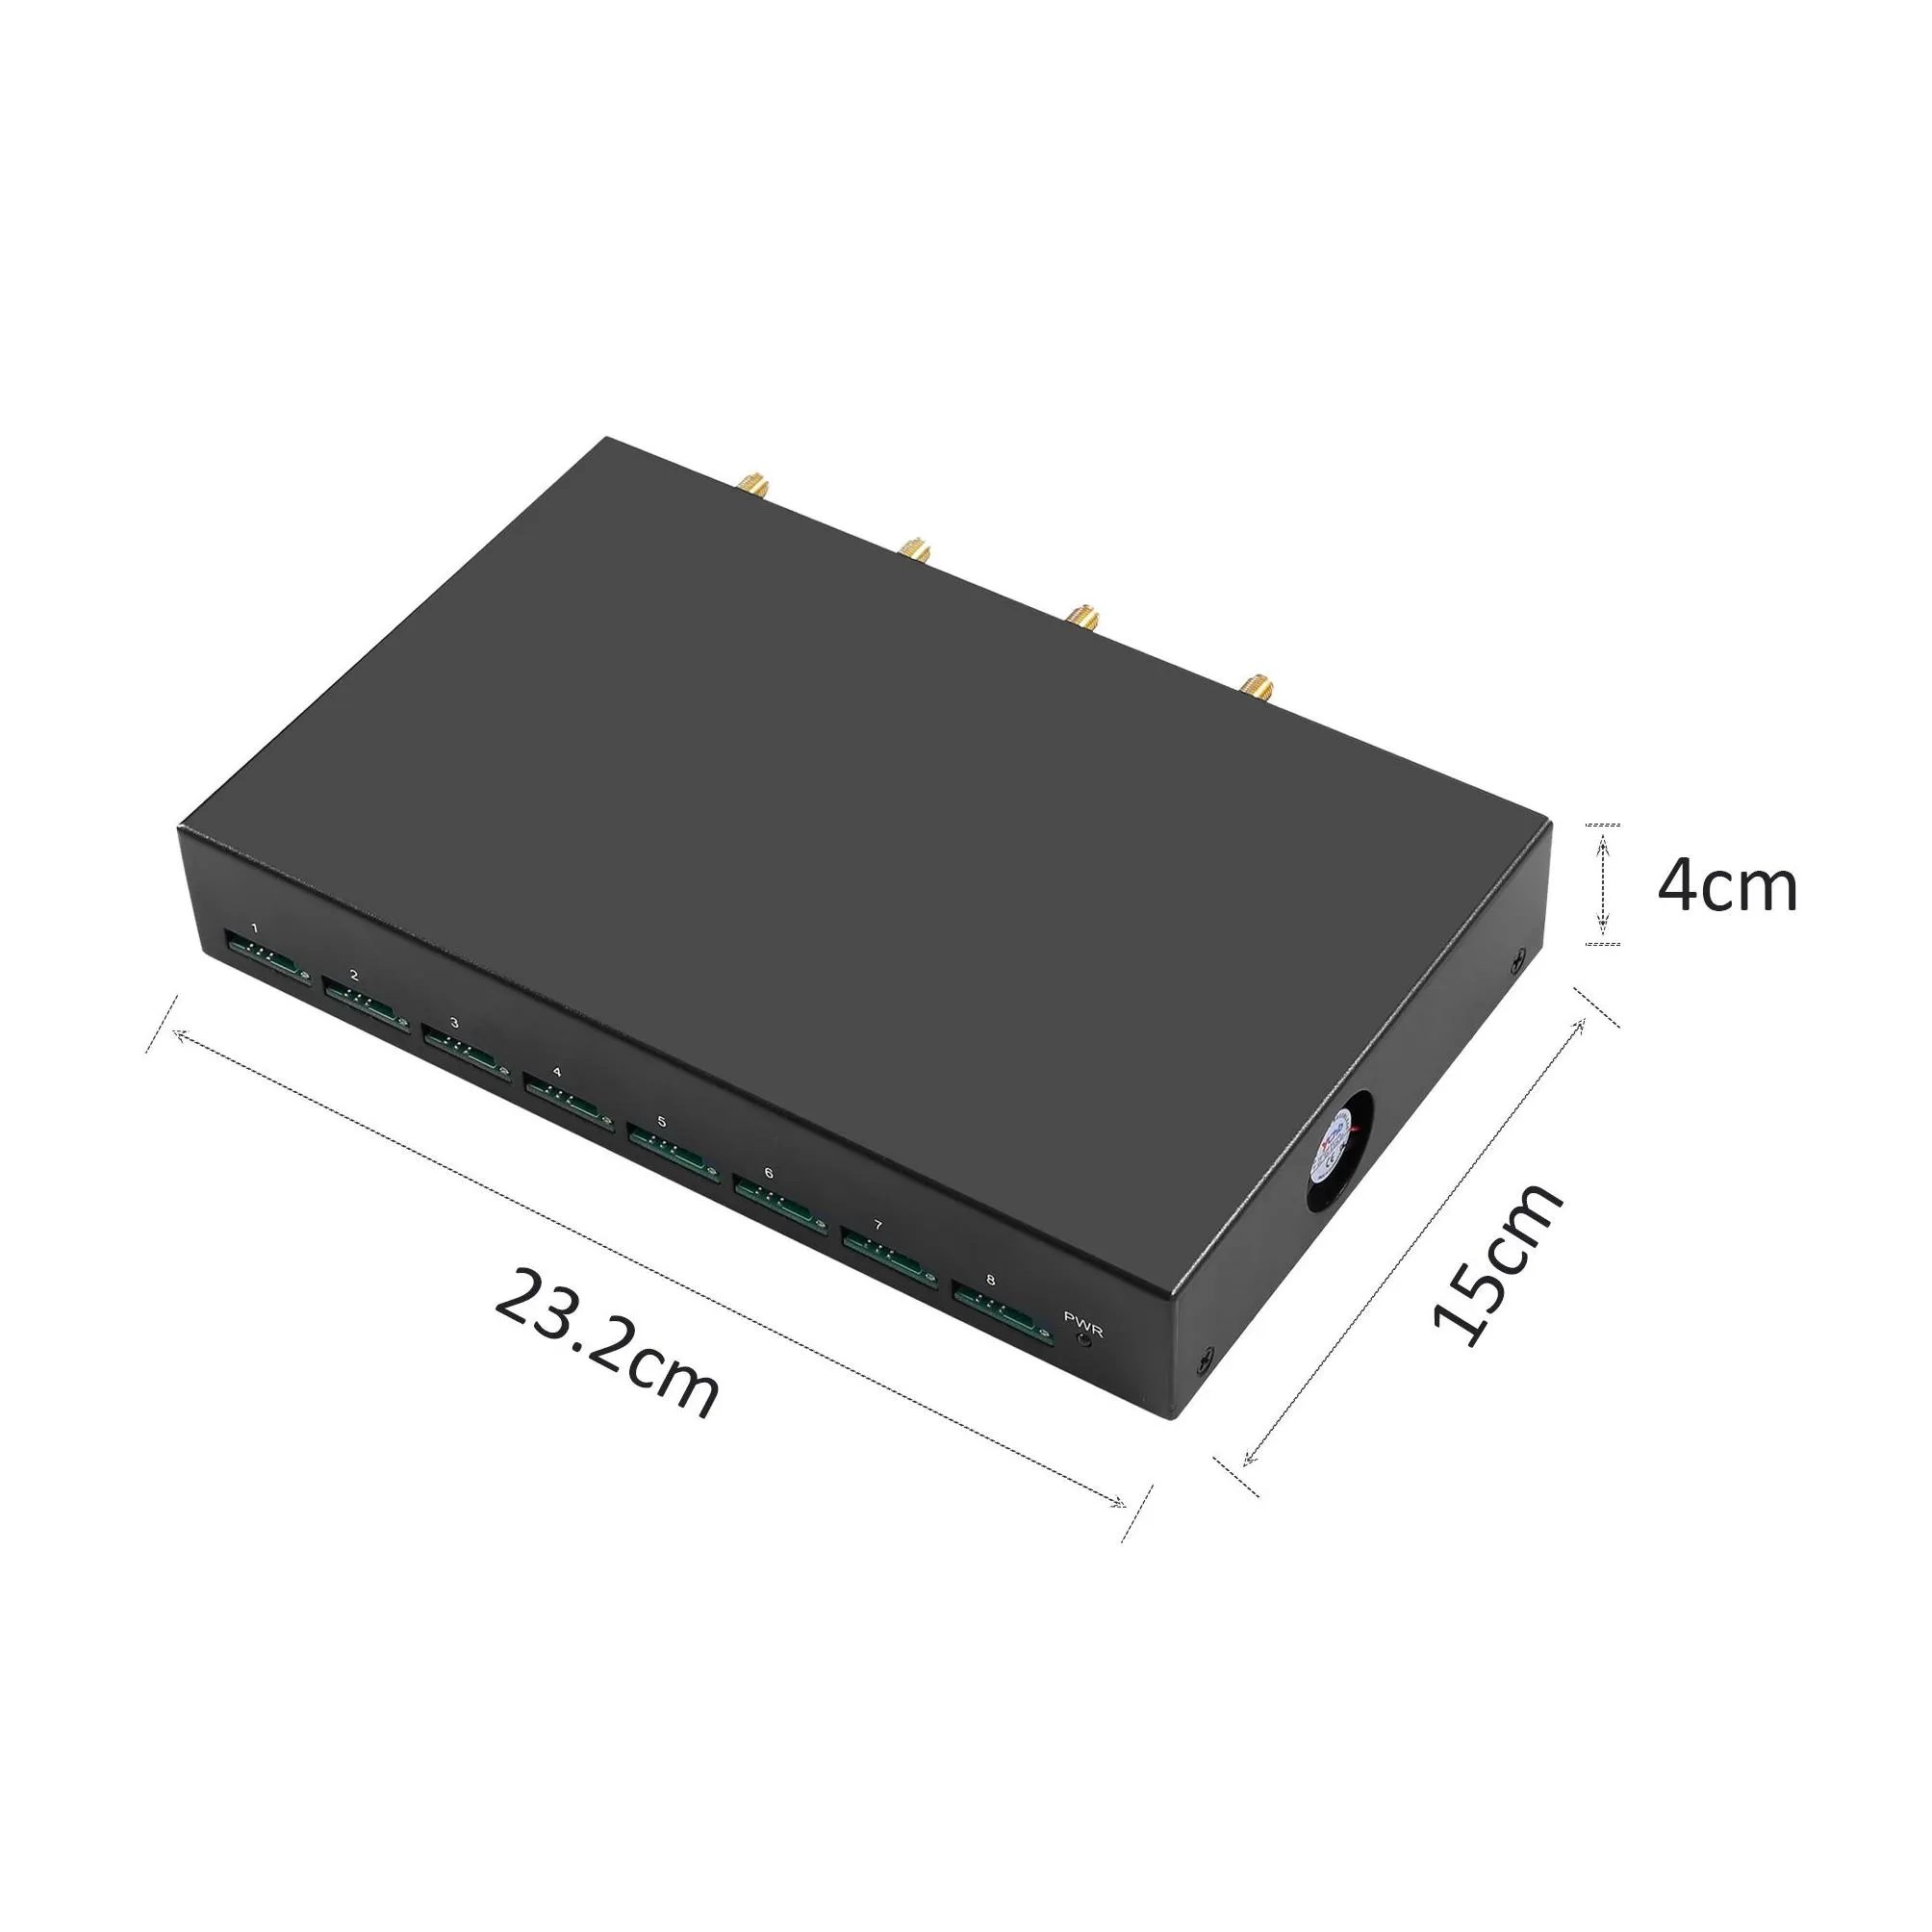 4G Lte 8 Antenna Channel High Gain Signal Wireless Modem Support SMPP Http API Data Analysis And SMS Notification System